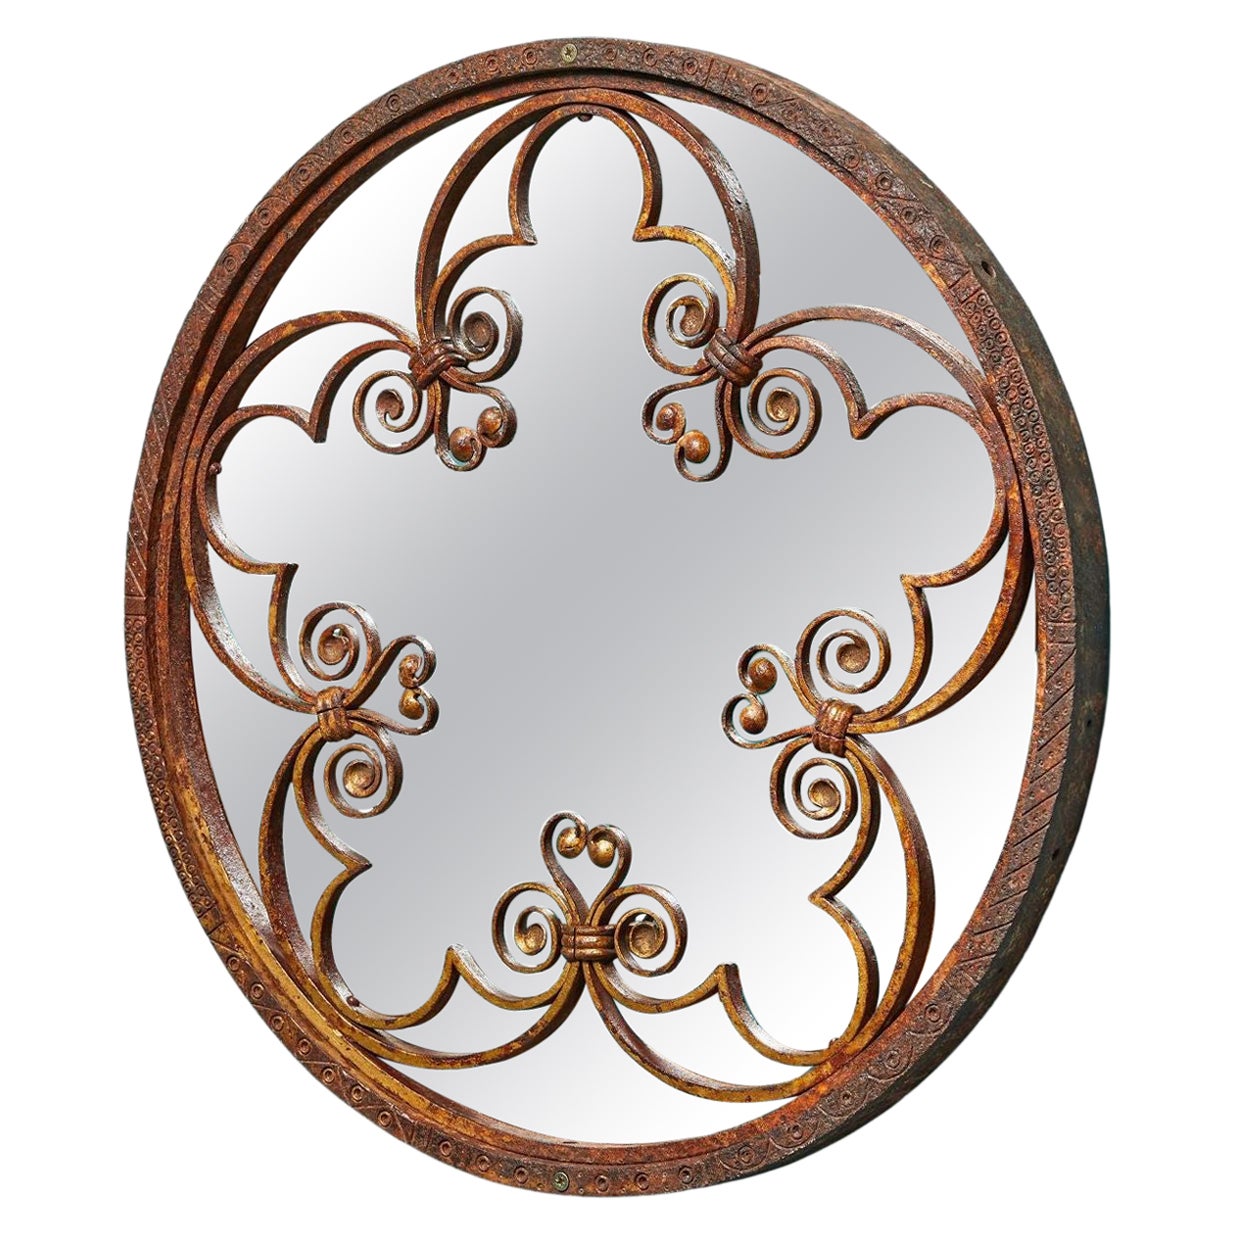 Antique Wrought Iron Mirror with Ornate Patterning For Sale